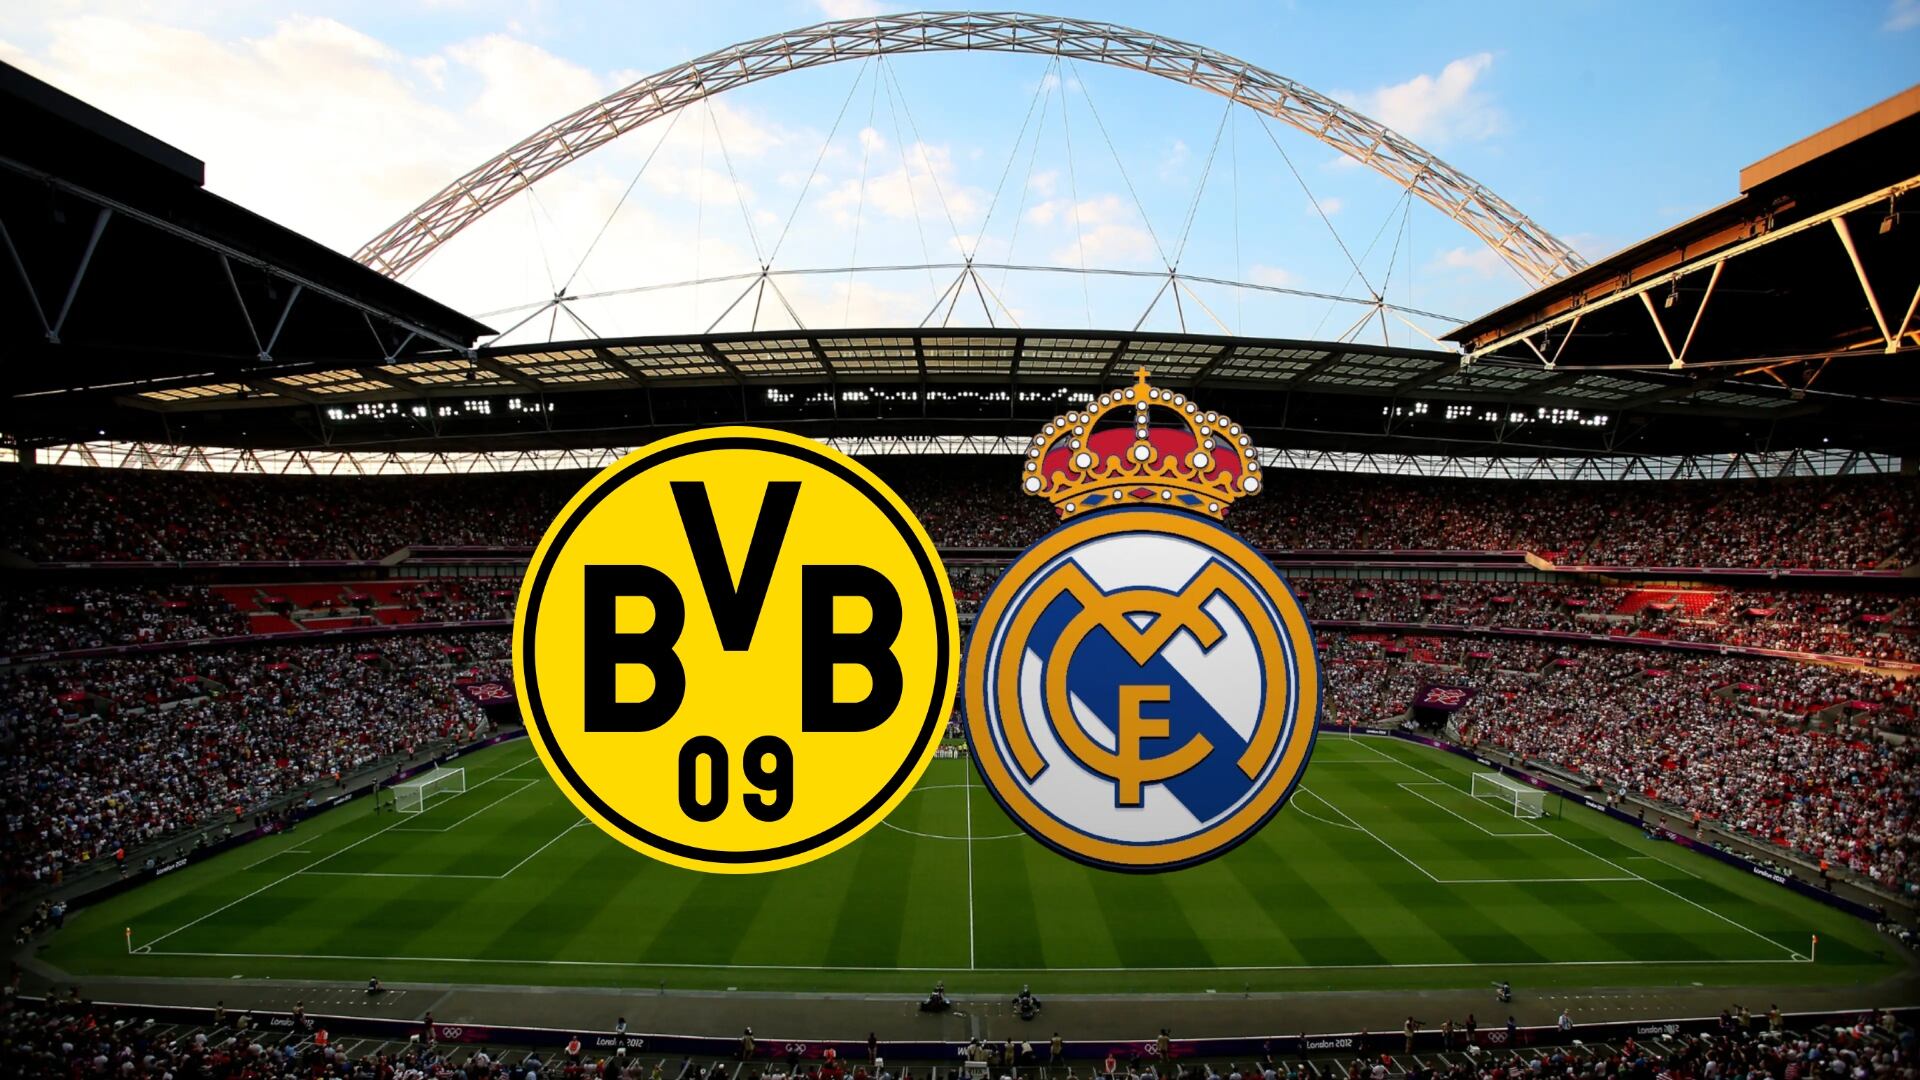 Real Madrid & Dortmund will play Champions League final, the strange reason why Dortmund will earn more if they lose  